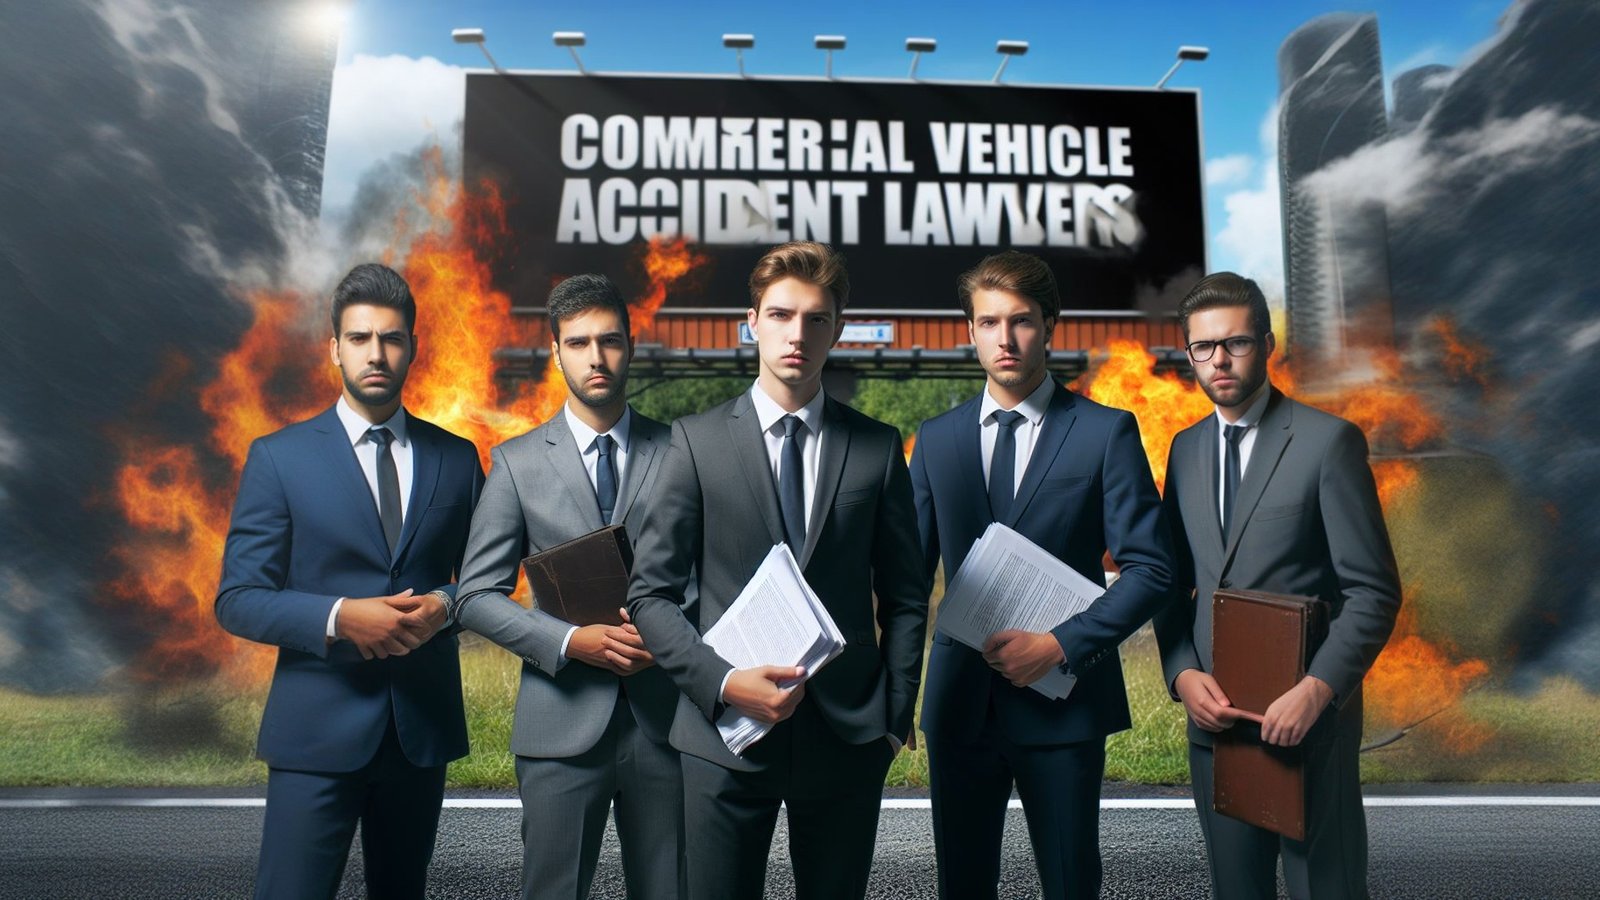 Commercial Vehicle Accident Lawyers